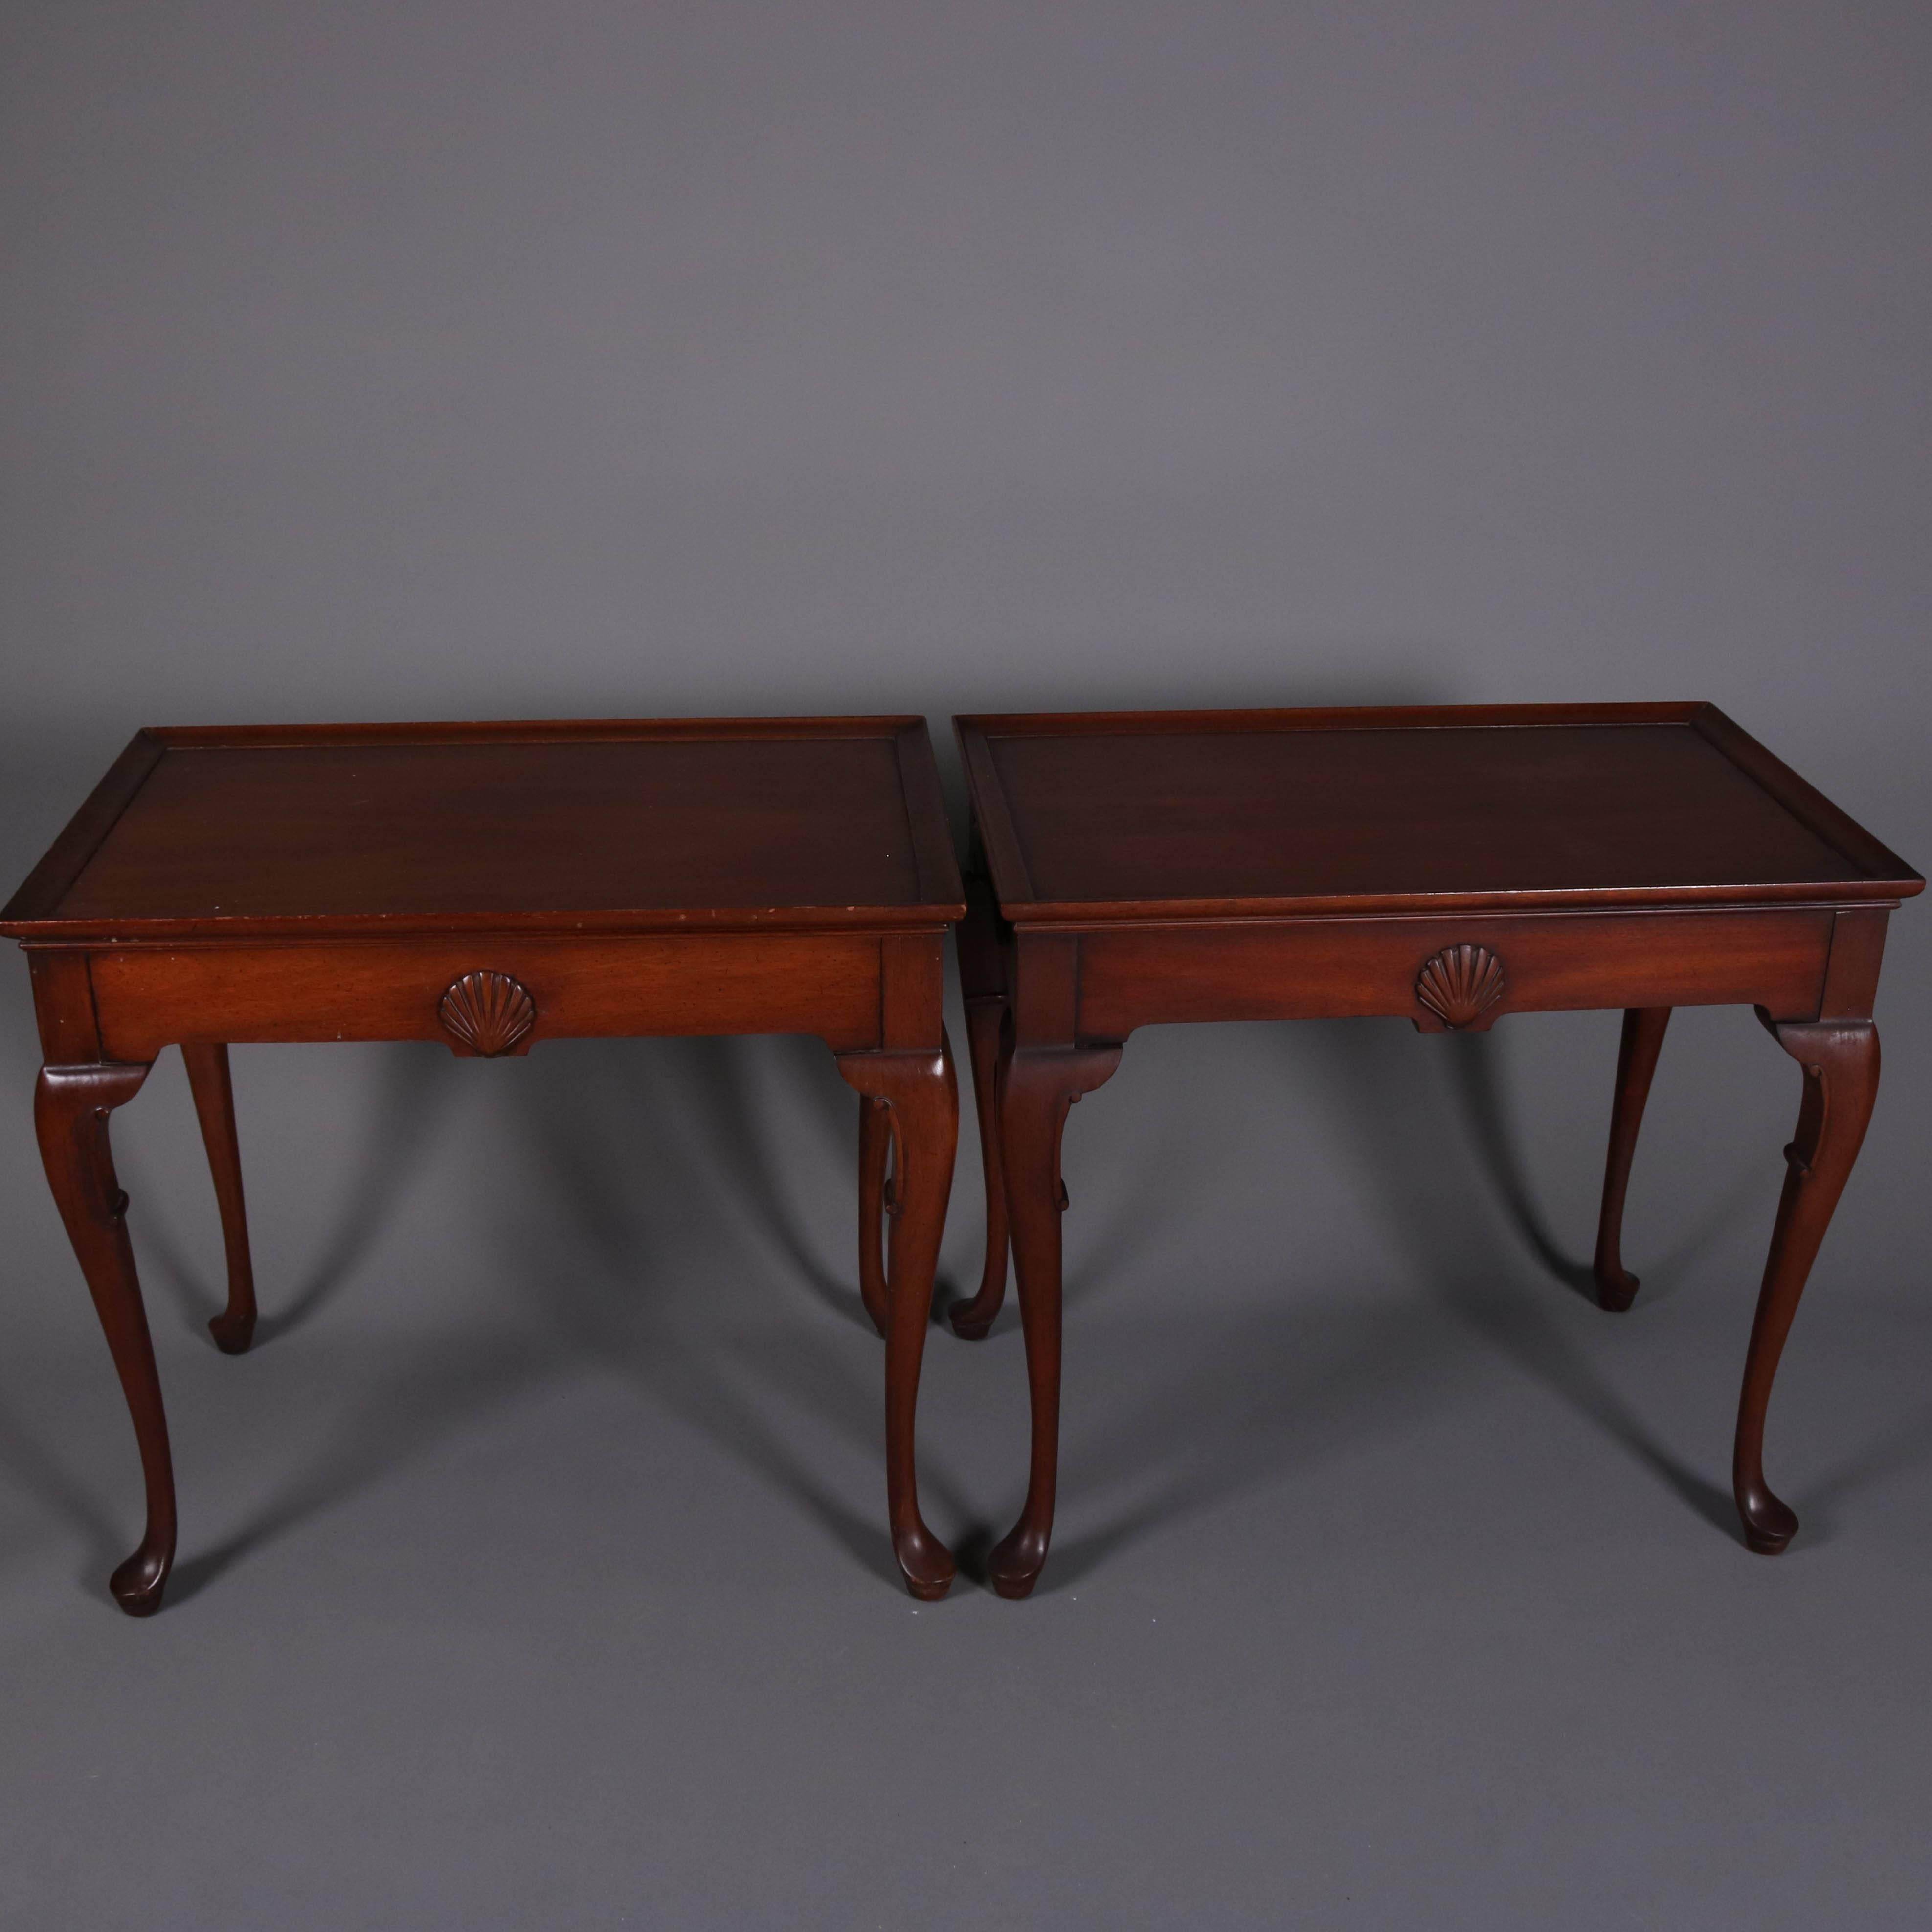 Pair of Queen Anne Style Kittinger School Mahogany Tea Tables with Candle Slides 1